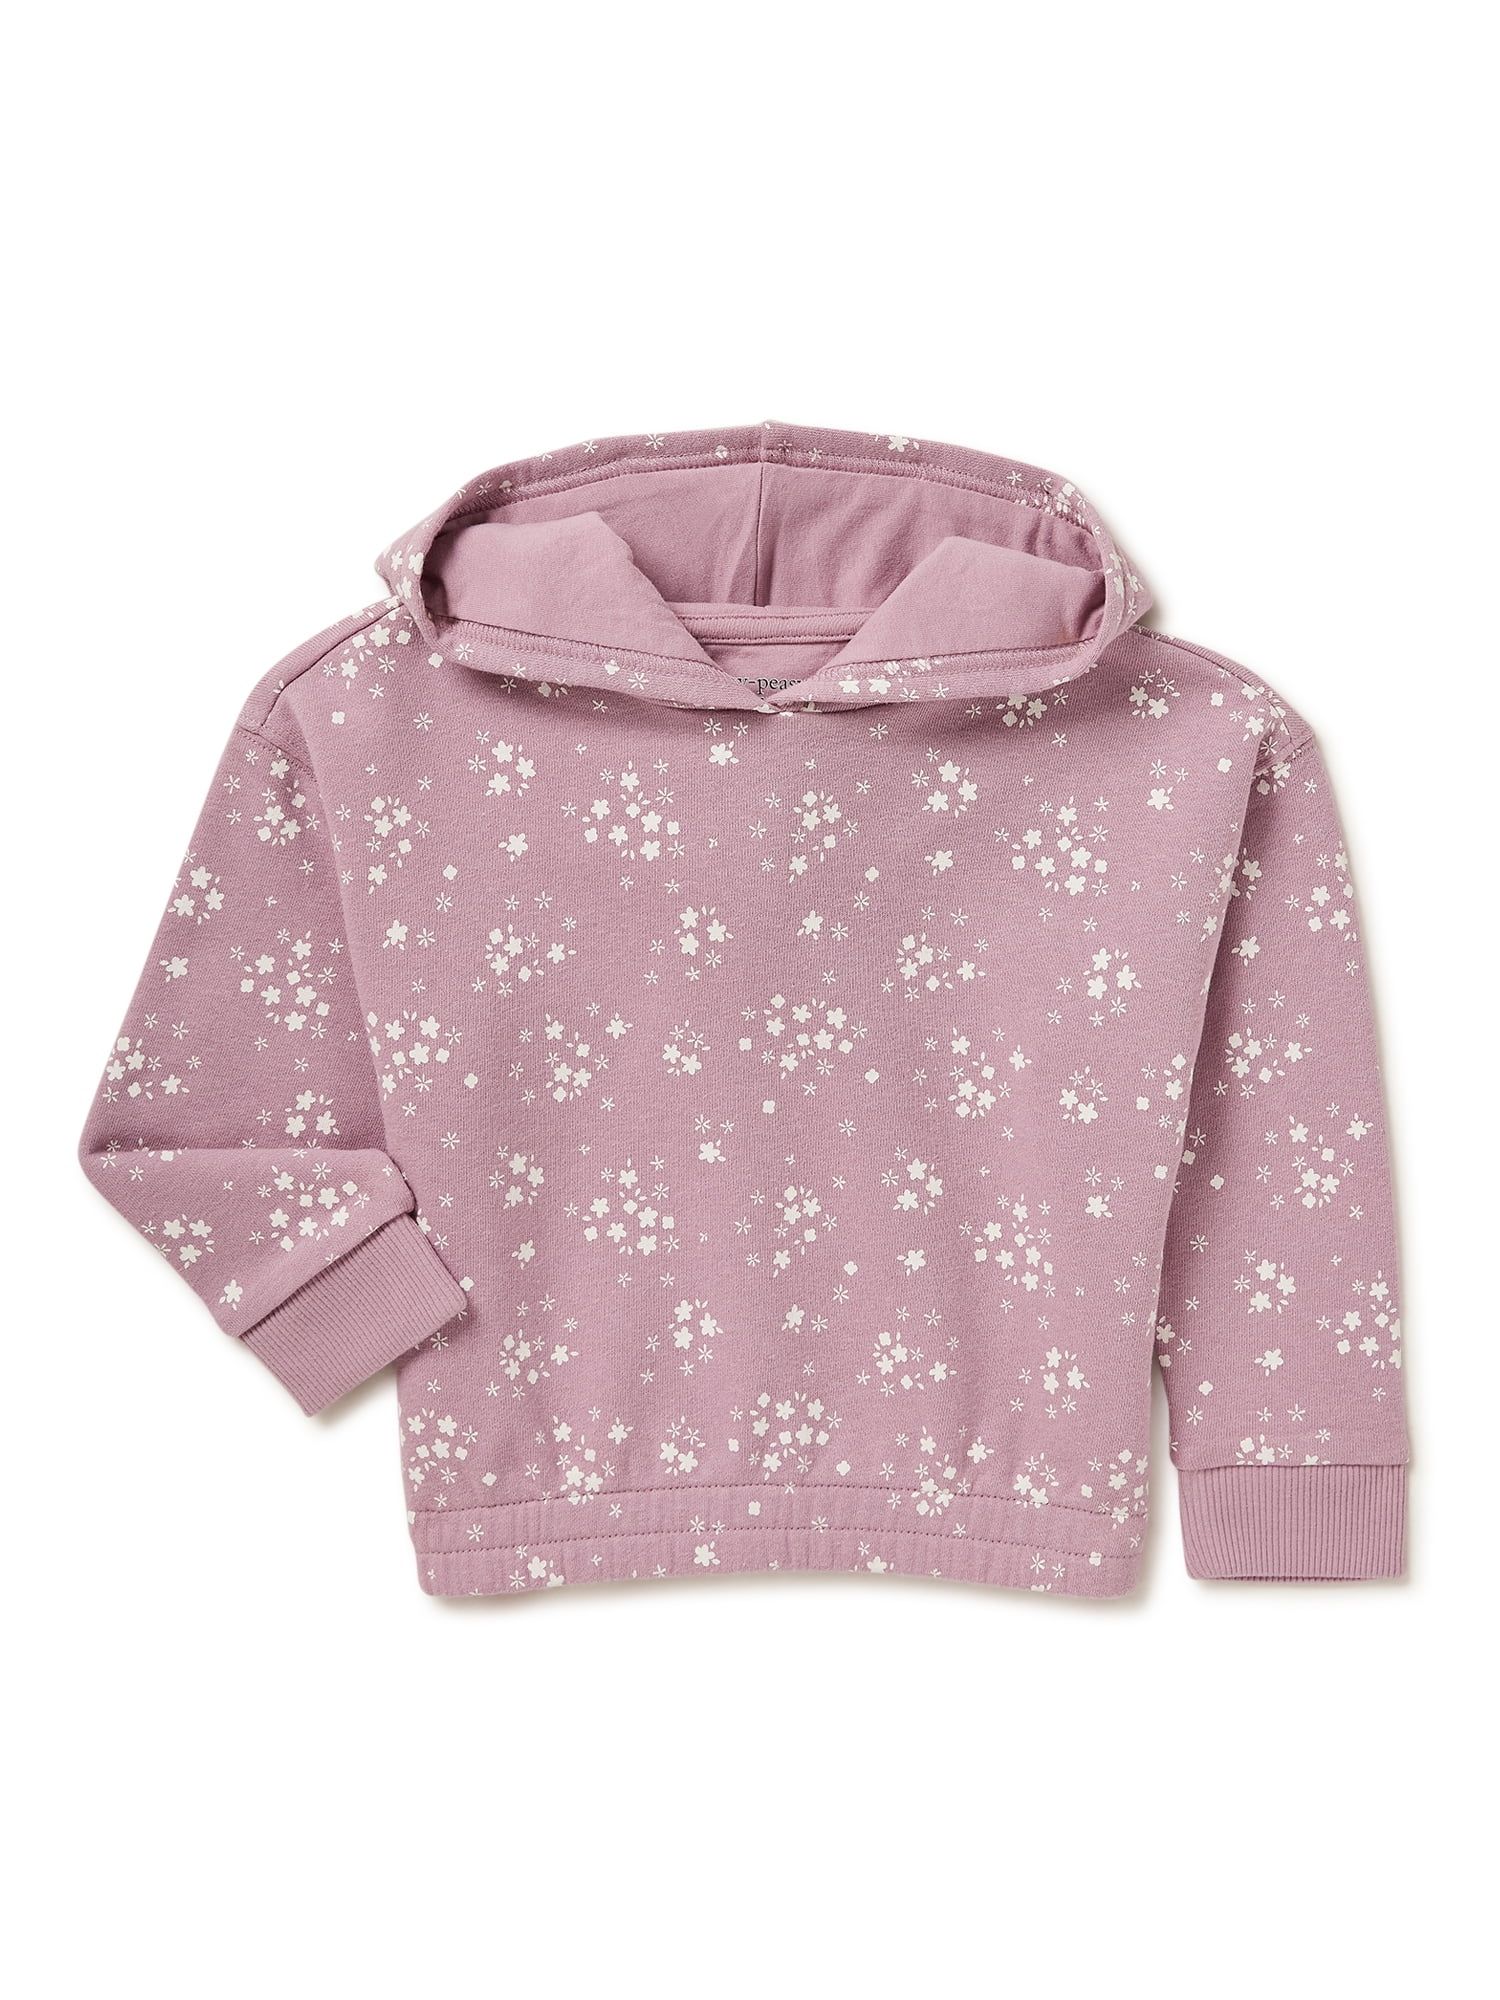 easy-peasy Baby and Toddler Girls' Pull-Over Hoodie, Sizes 12 Months-5T | Walmart (US)